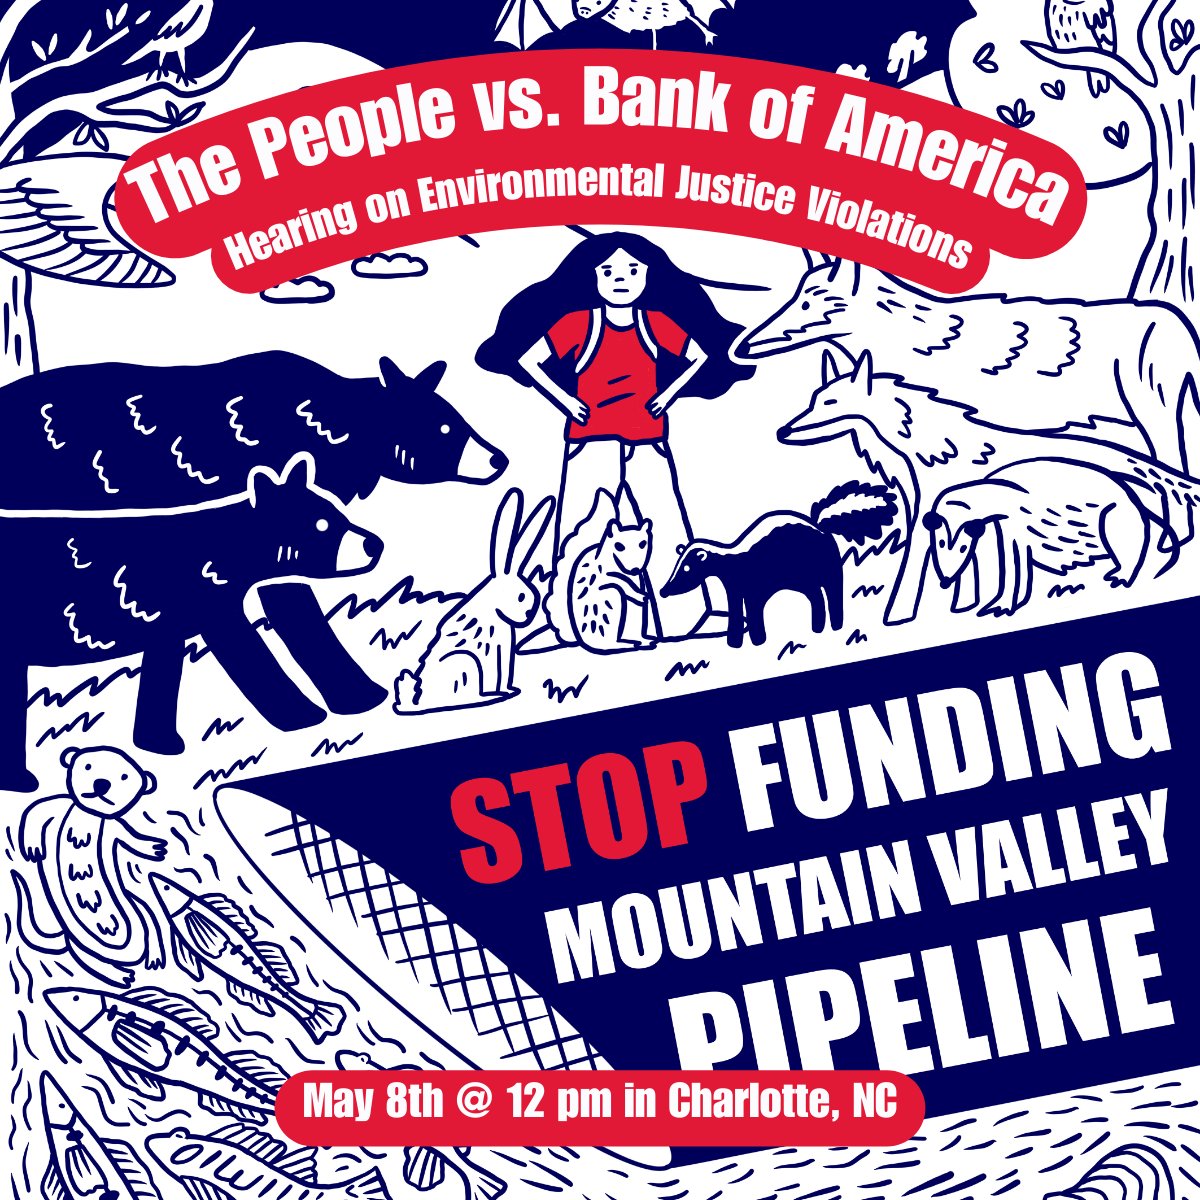 Bank of America has been funding climate chaos for too long! We're traveling to their HQ in solidarity with Appalachian communities to send @BankofAmerica a clear message: stop backing the harmful Mountain Valley Pipeline and all fossil fuel projects NOW! powhr.org/event/the-peop…